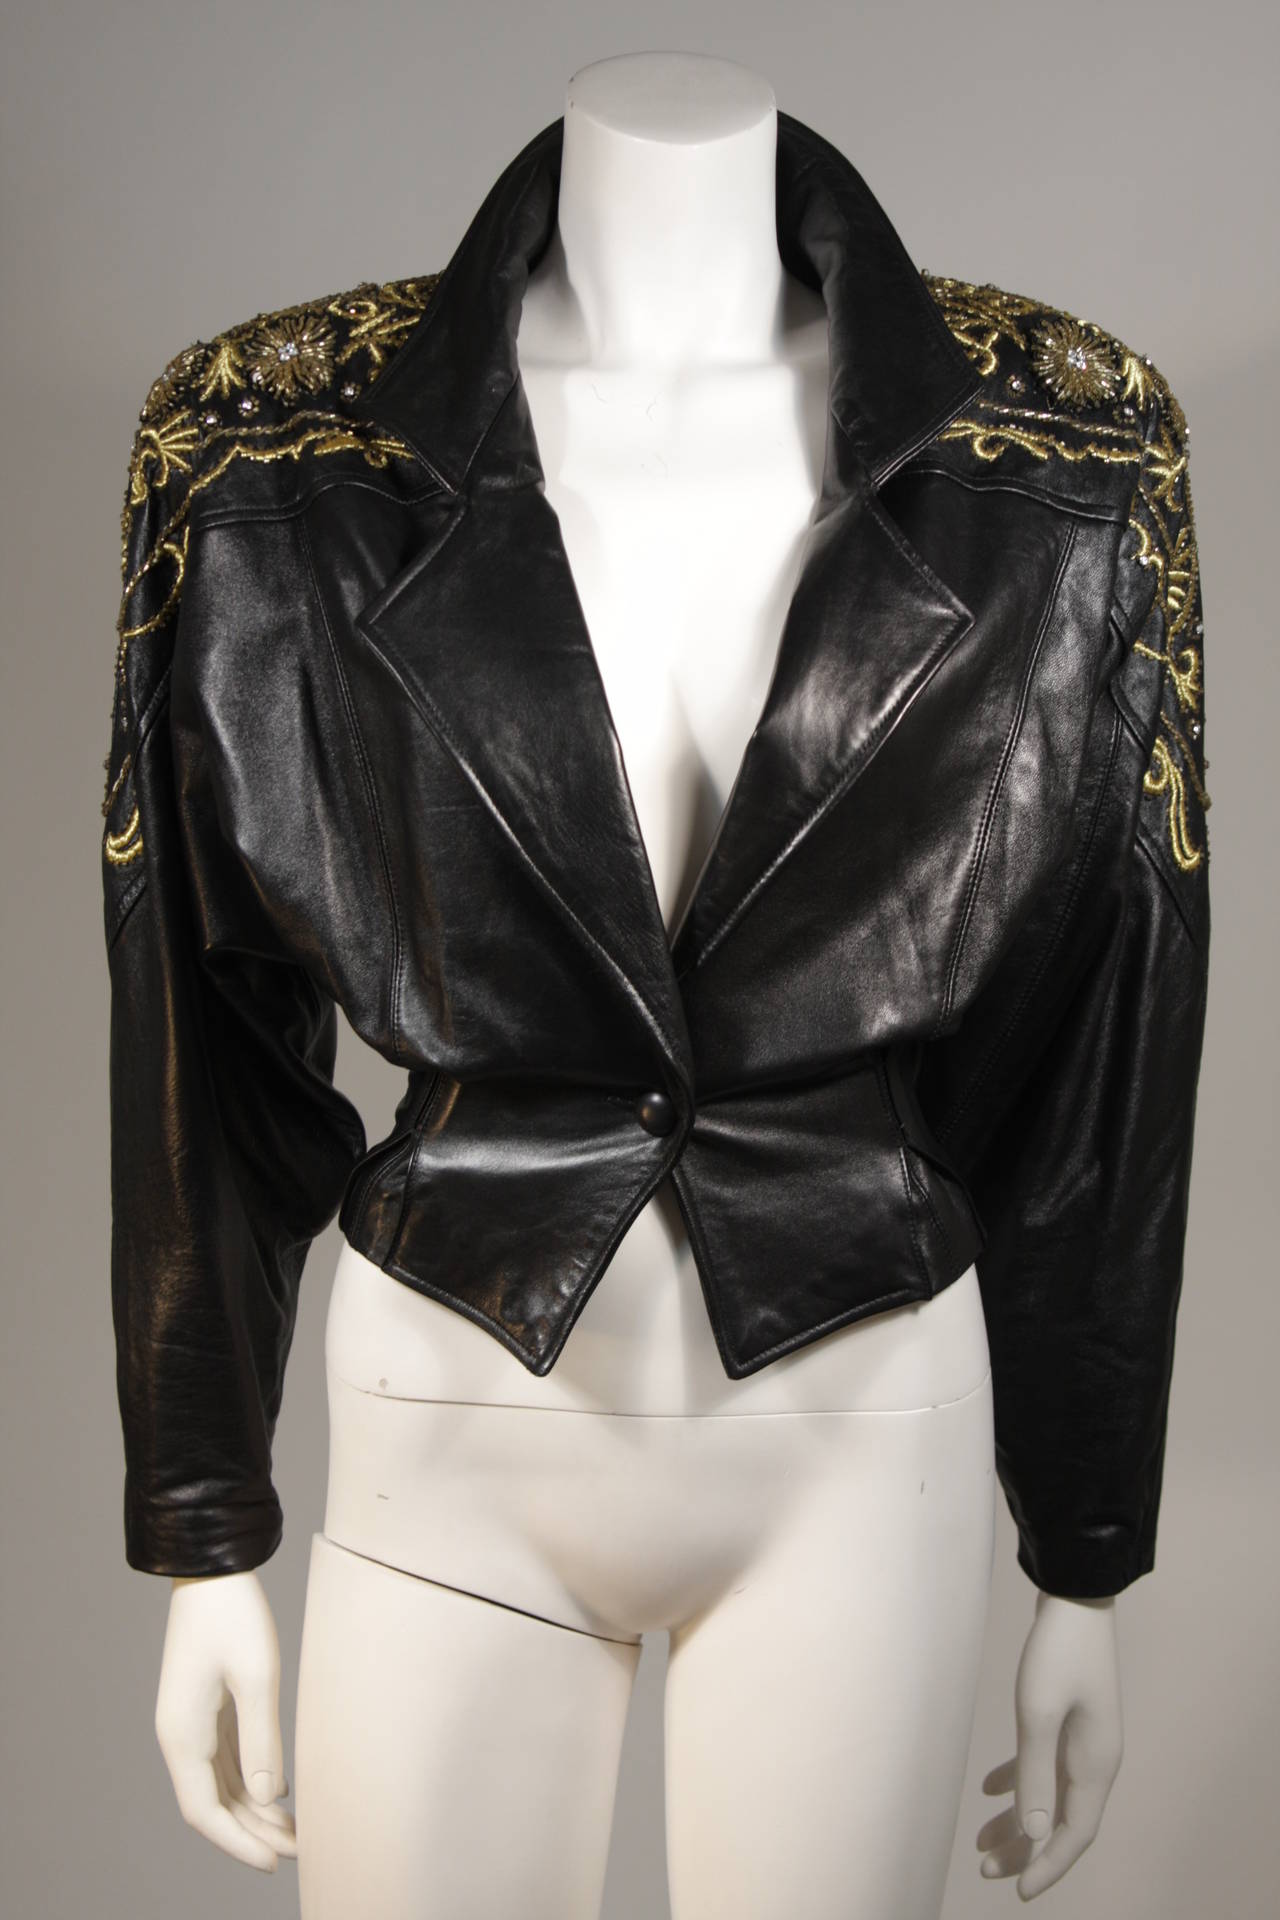 This Erez design is available for viewing at our Beverly Hills Boutique. The jacket is a composed of a supple black leather with gold embroidery and beading. There is a center front button closure. The jacket comes with shoulder pads. 

Please